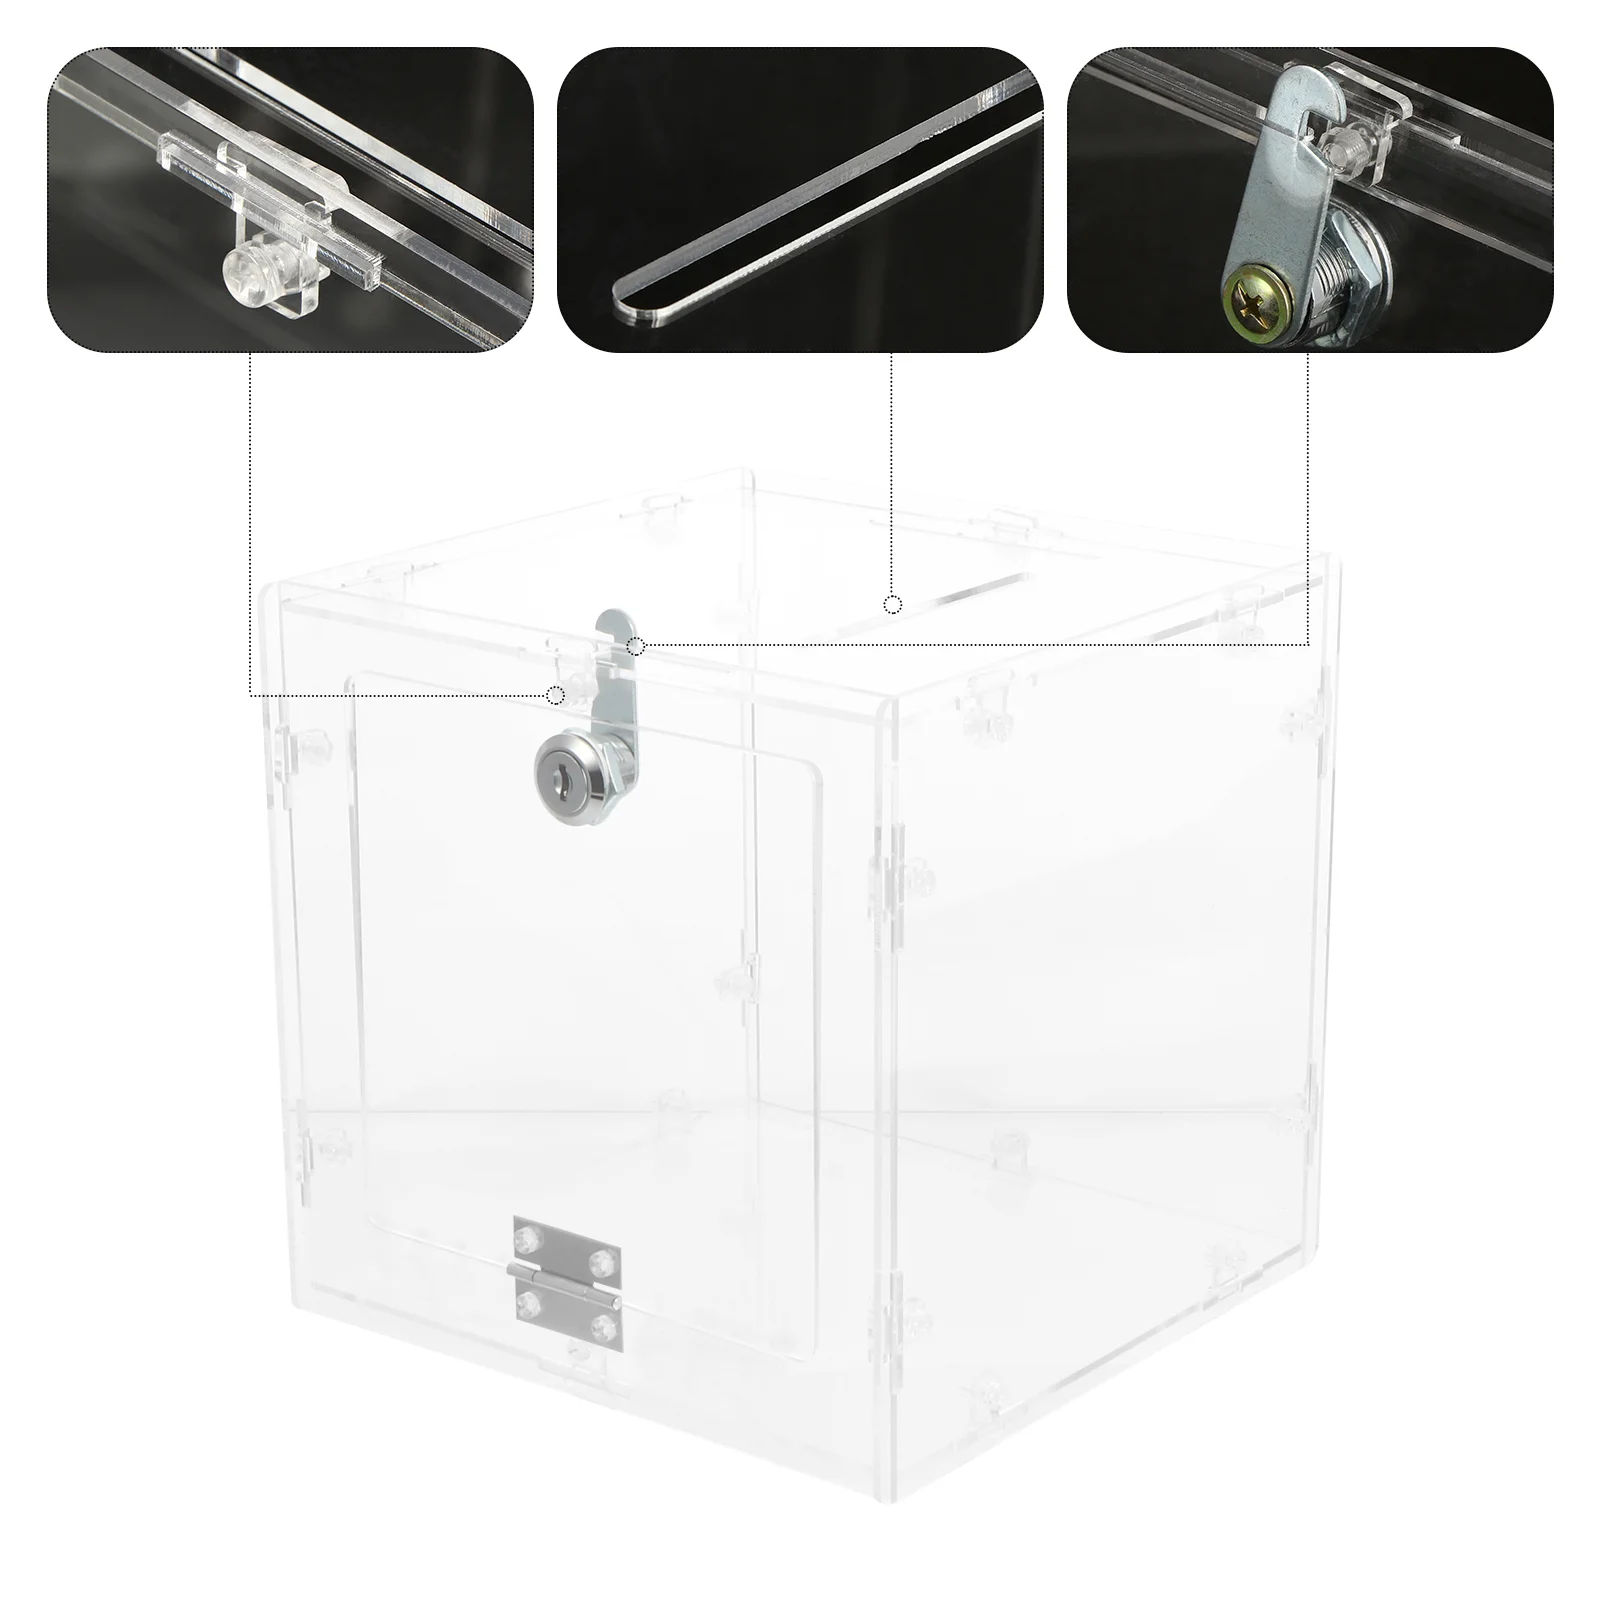 Display Donation Box with Lock Clear Ballot Box Ticket Suggestion Container Voting Comment Box for Fundraising